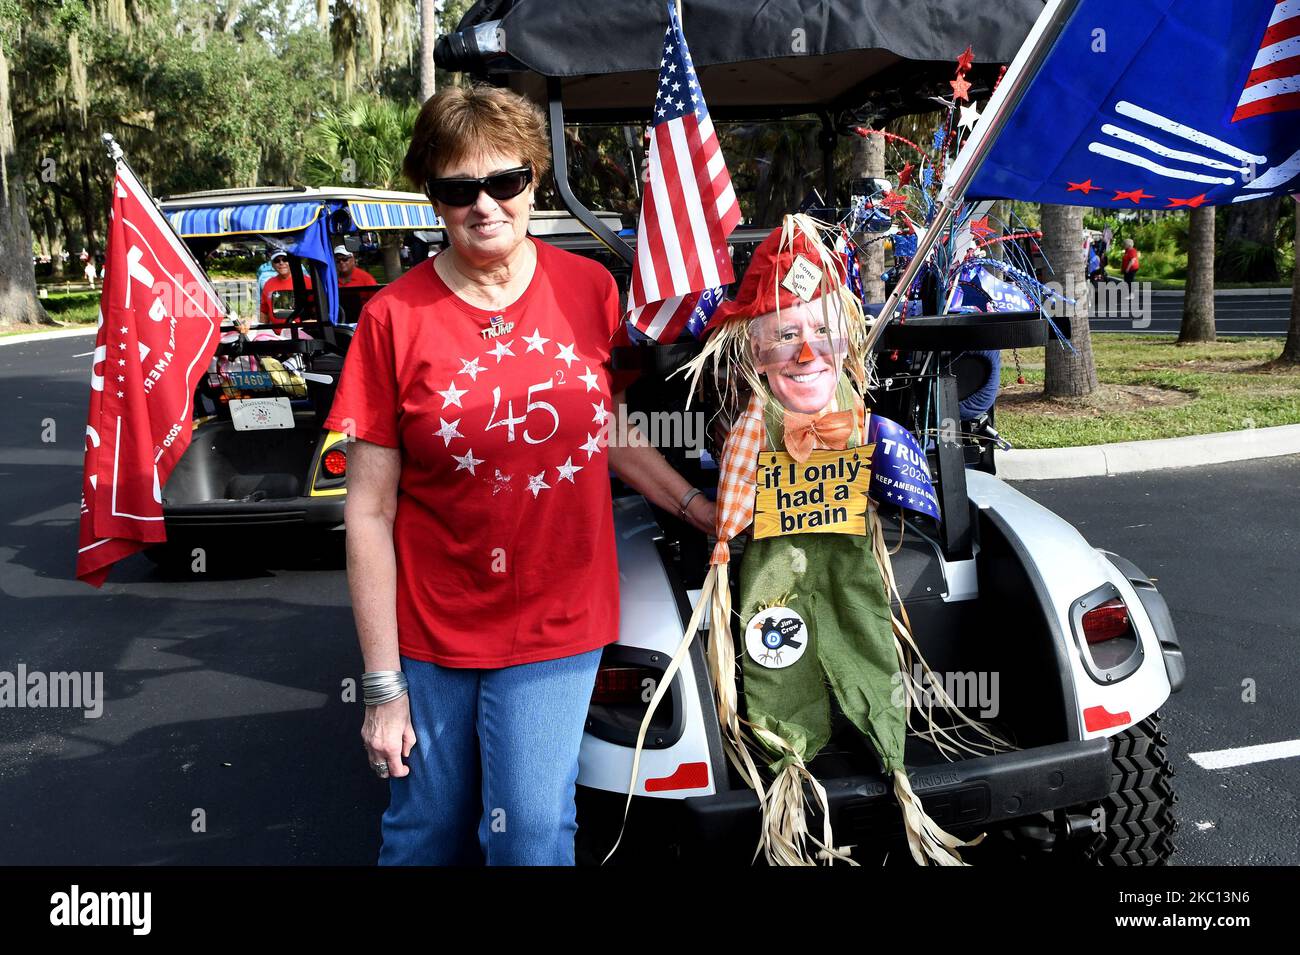 Sheila Valastro poses with her Joe Biden scarecrow while waiting to participate in a golf cart parade in support of the re-election of U.S. President Donald Trump on October 3, 2020 in The Villages, Florida, a retirement community north of Orlando. Trump was admitted to Walter Reed National Military Medical Center yesterday after contracting COVID-19. (Photo by Paul Hennessy/NurPhoto) Stock Photo